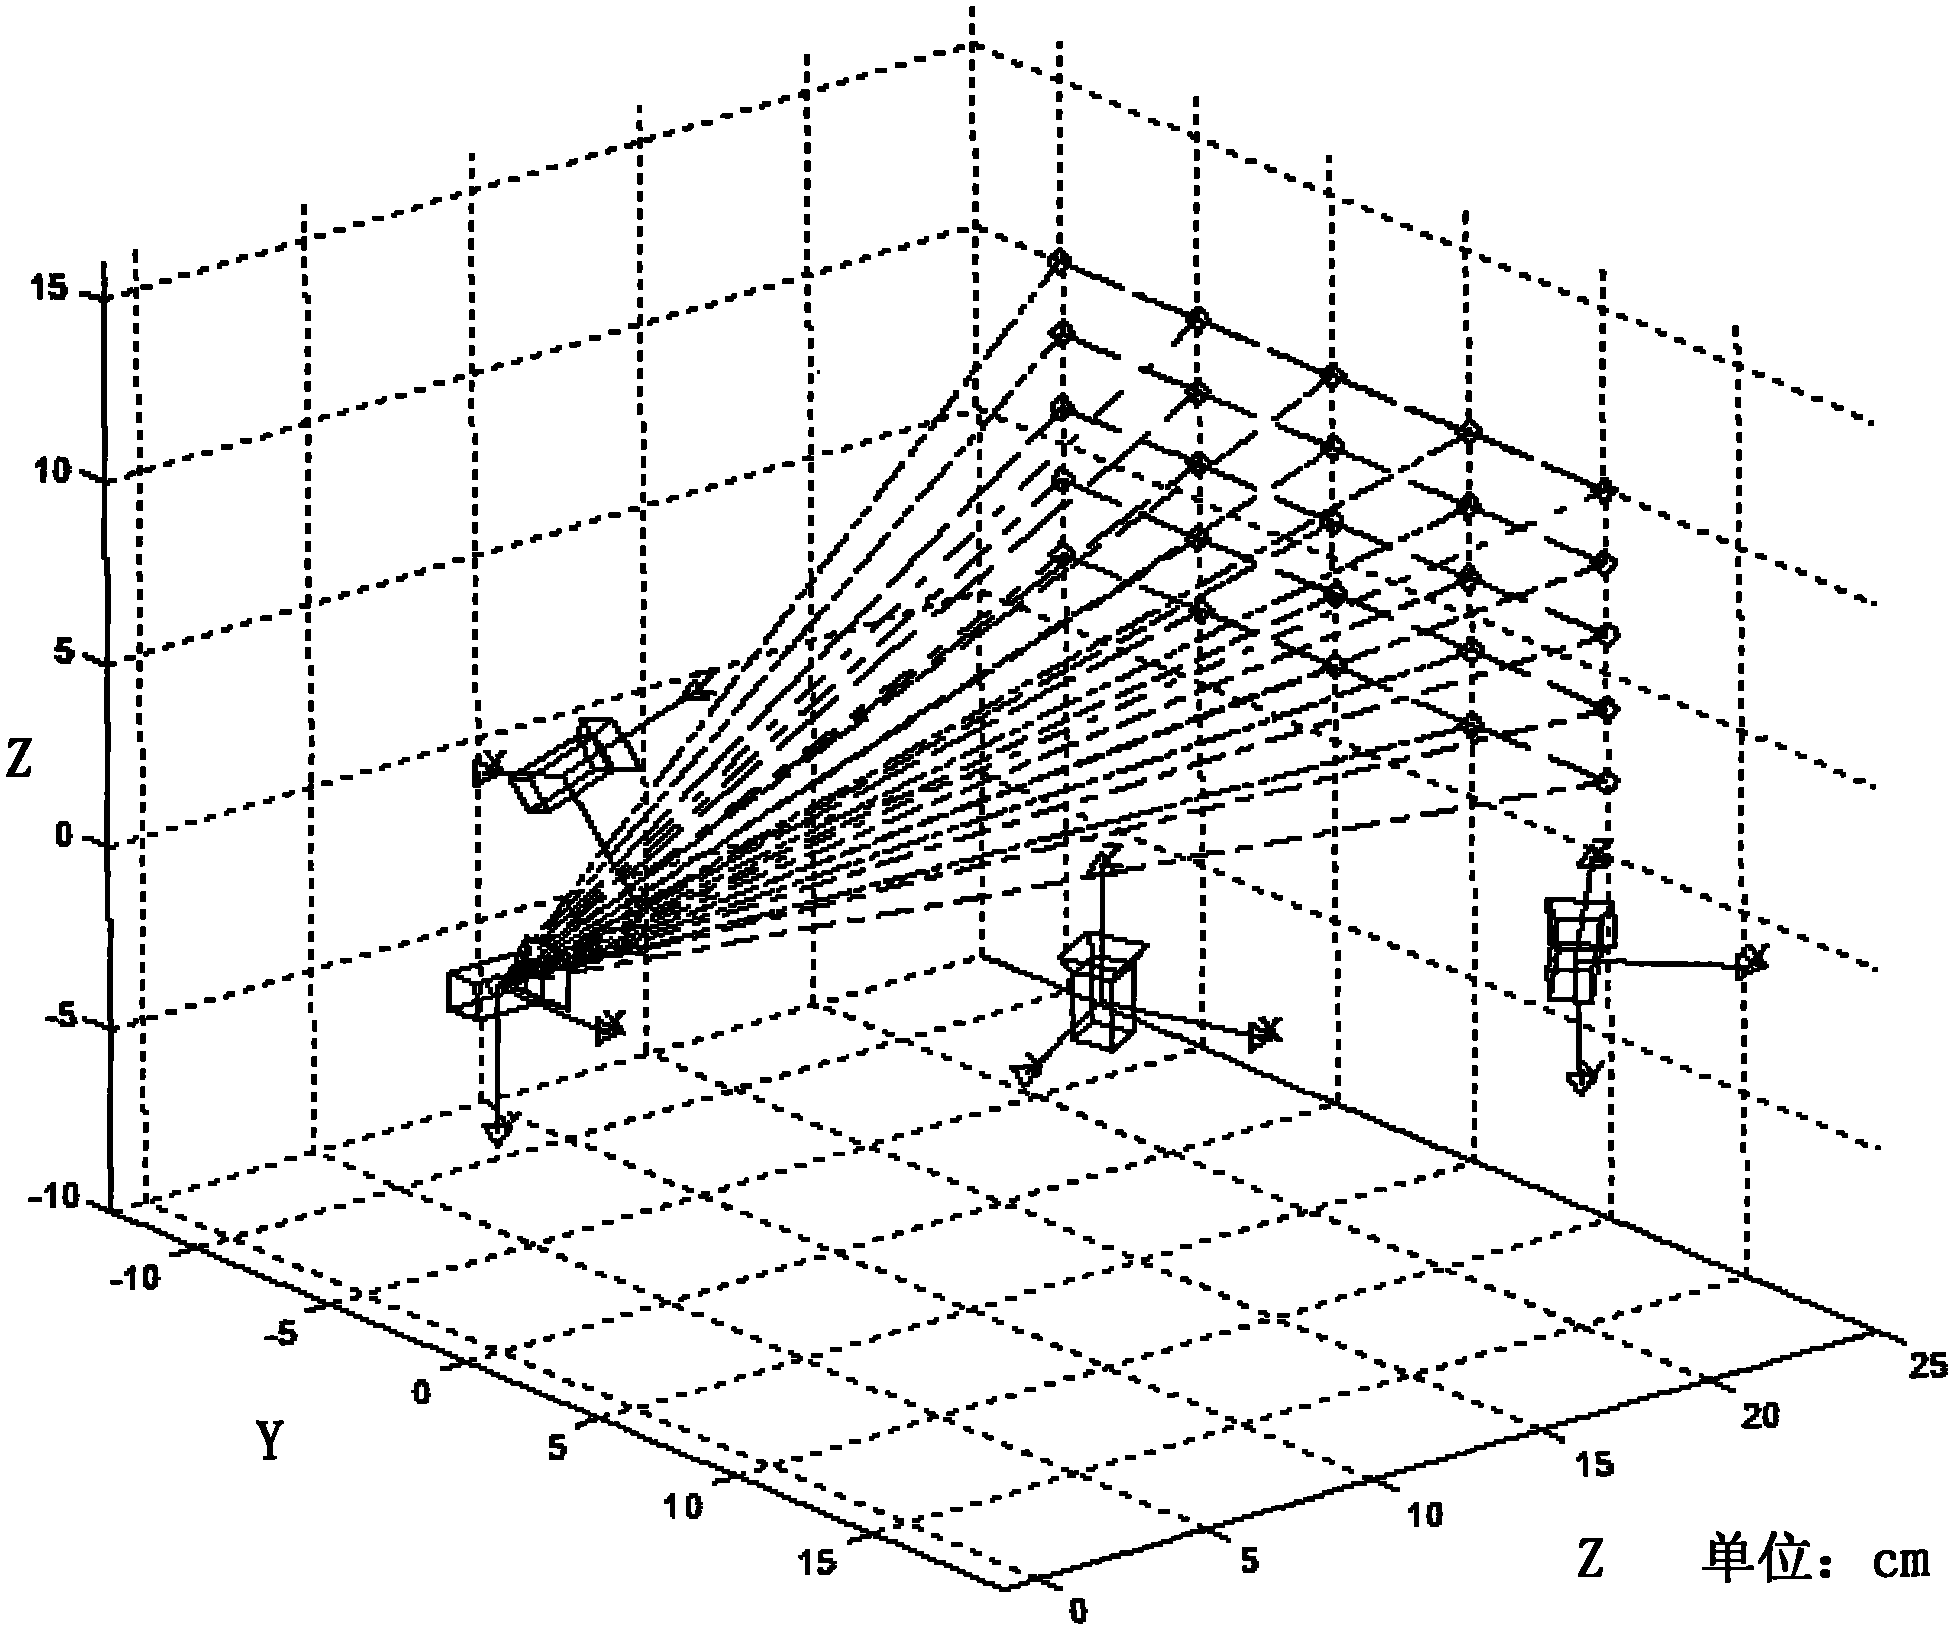 Self-calibration method of multi-view structured light system